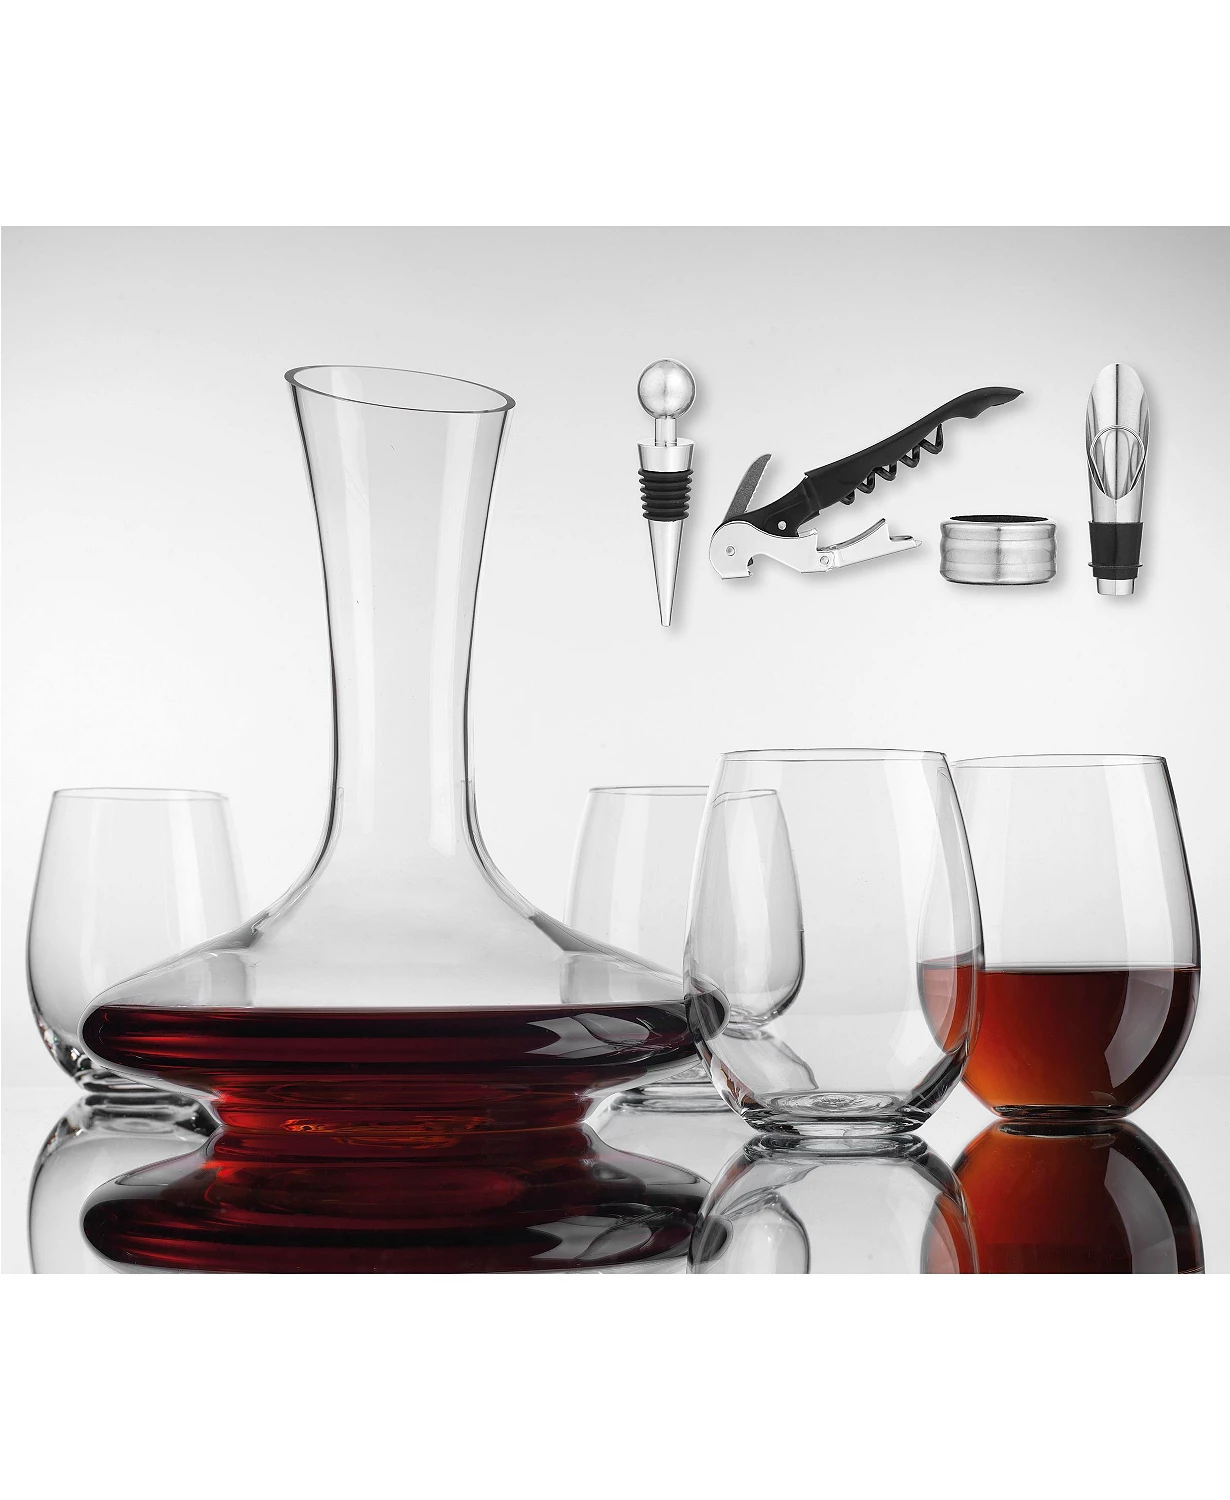 Wine Carafe Set with 4 Stemless Glasses, a Stopper, Pourer, Corkscrew, and Collar $31.99